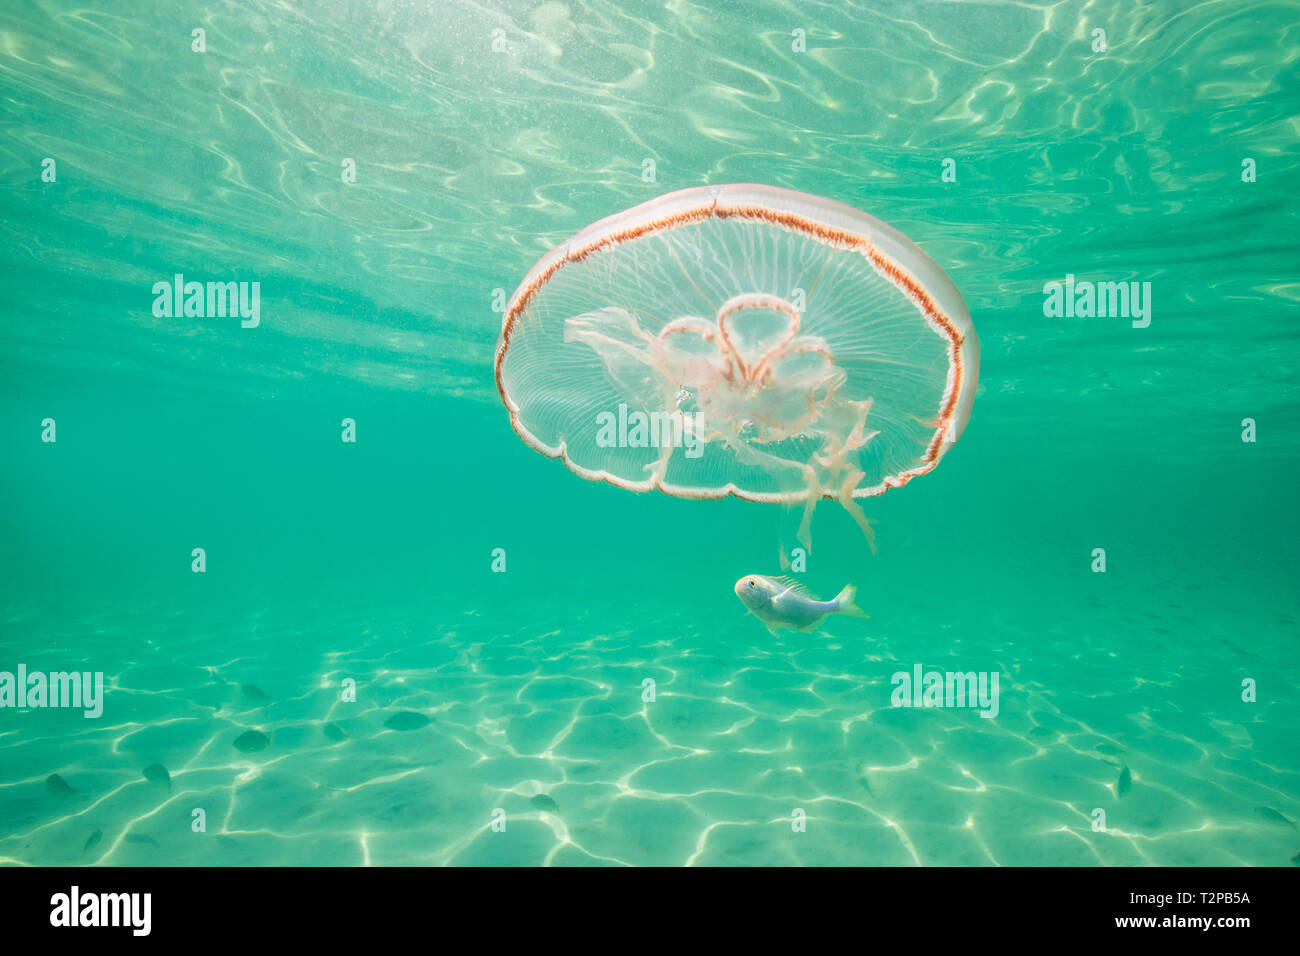 Moon jellyfish harbouring baby fish for protection against predators Stock Photo